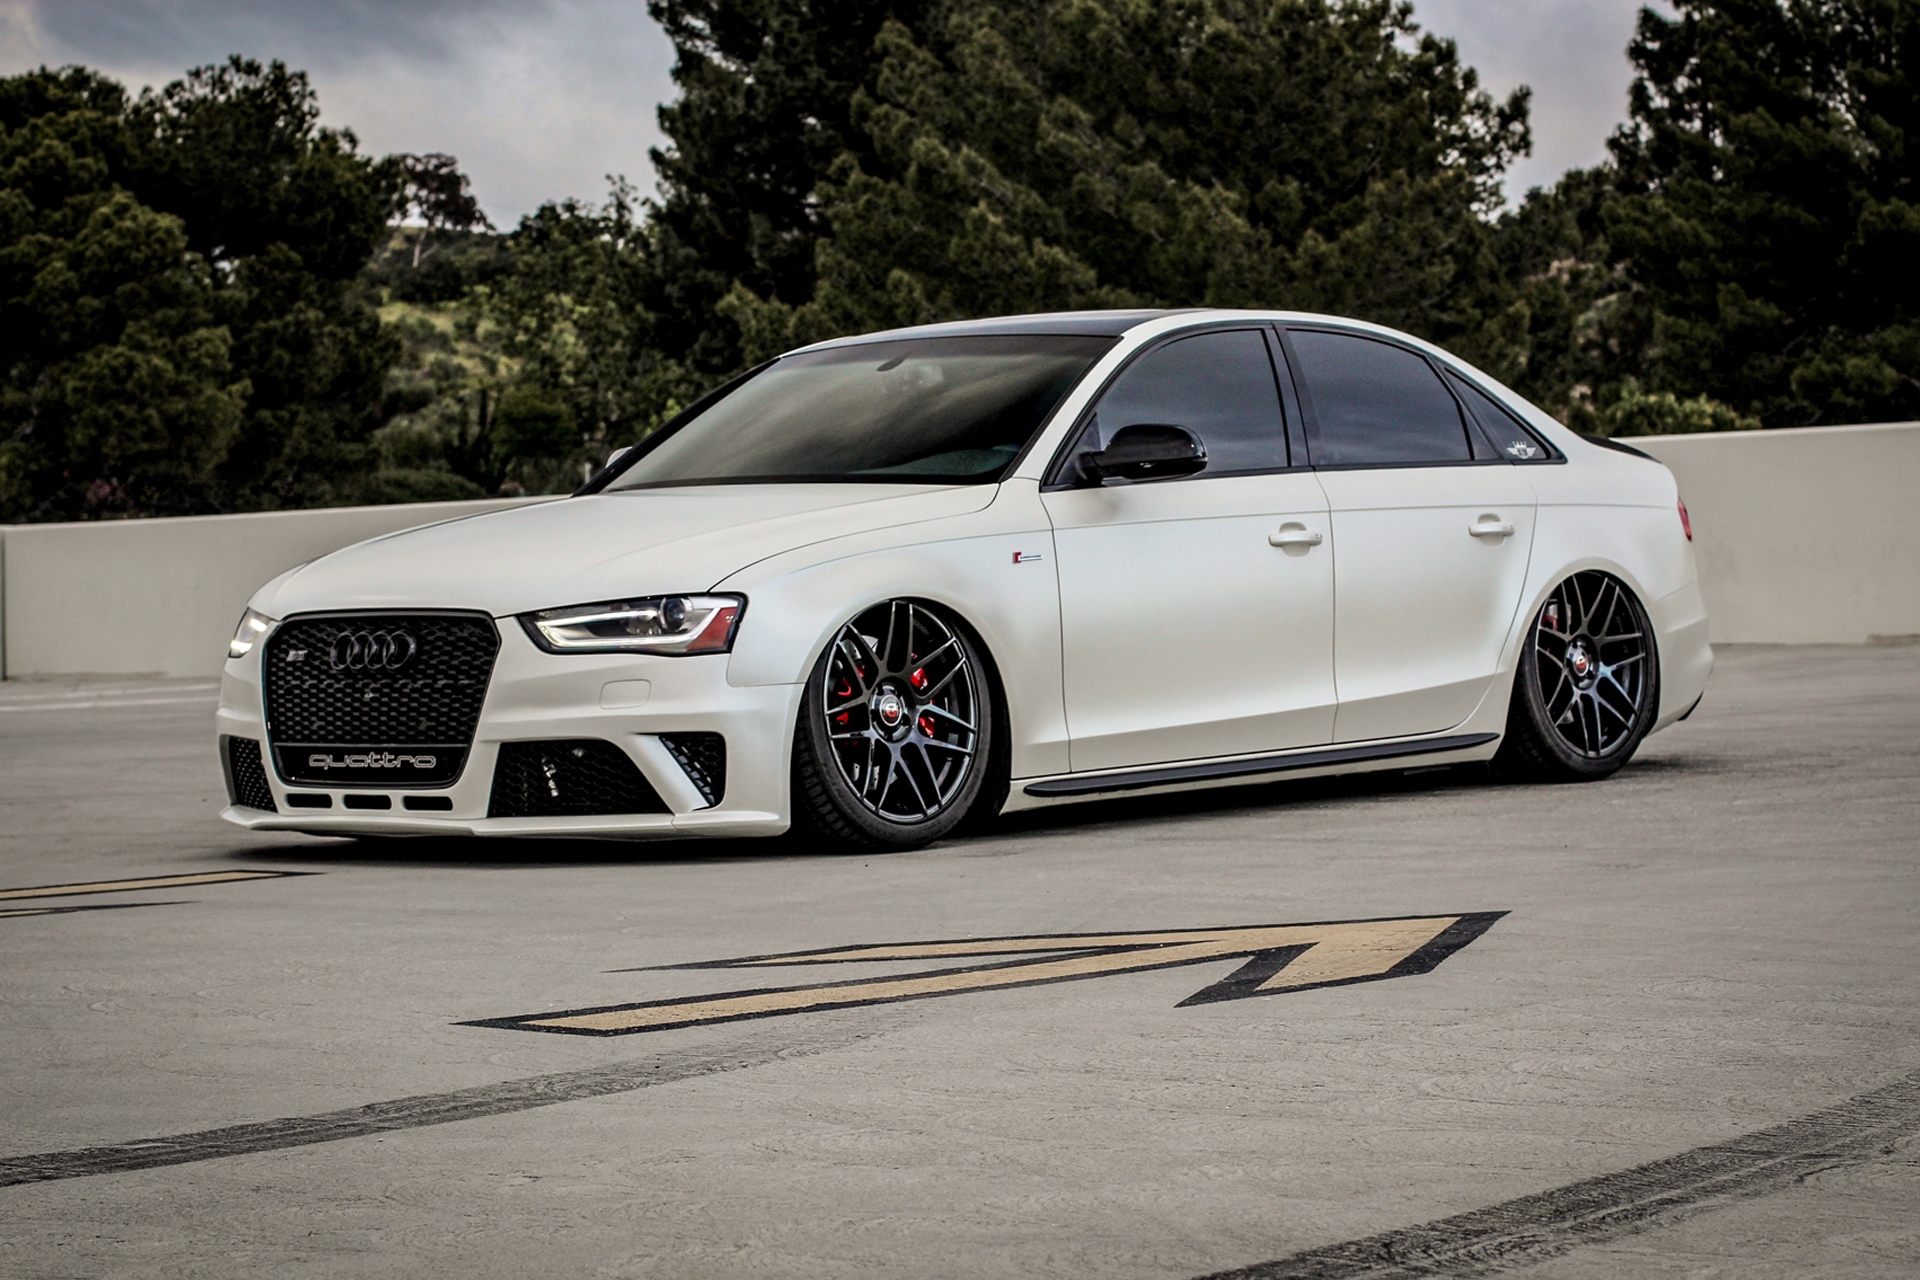 Curva Concepts C300 Aftermarket Wheels on a Bagged Audi S4